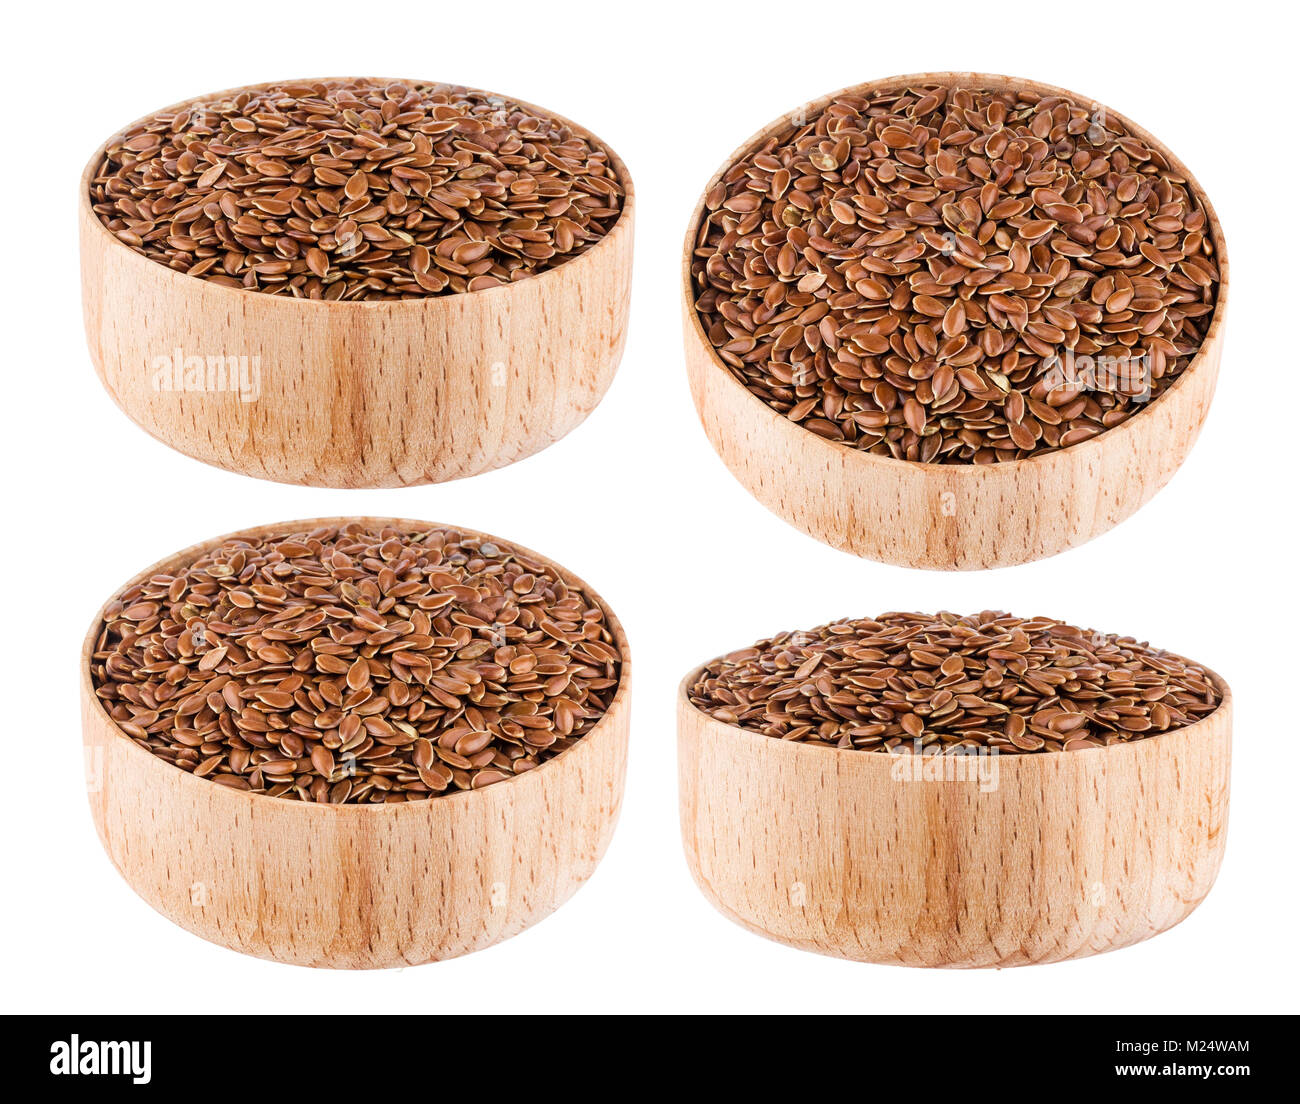 Flax seeds in wooden bowl isolated on white background Stock Photo